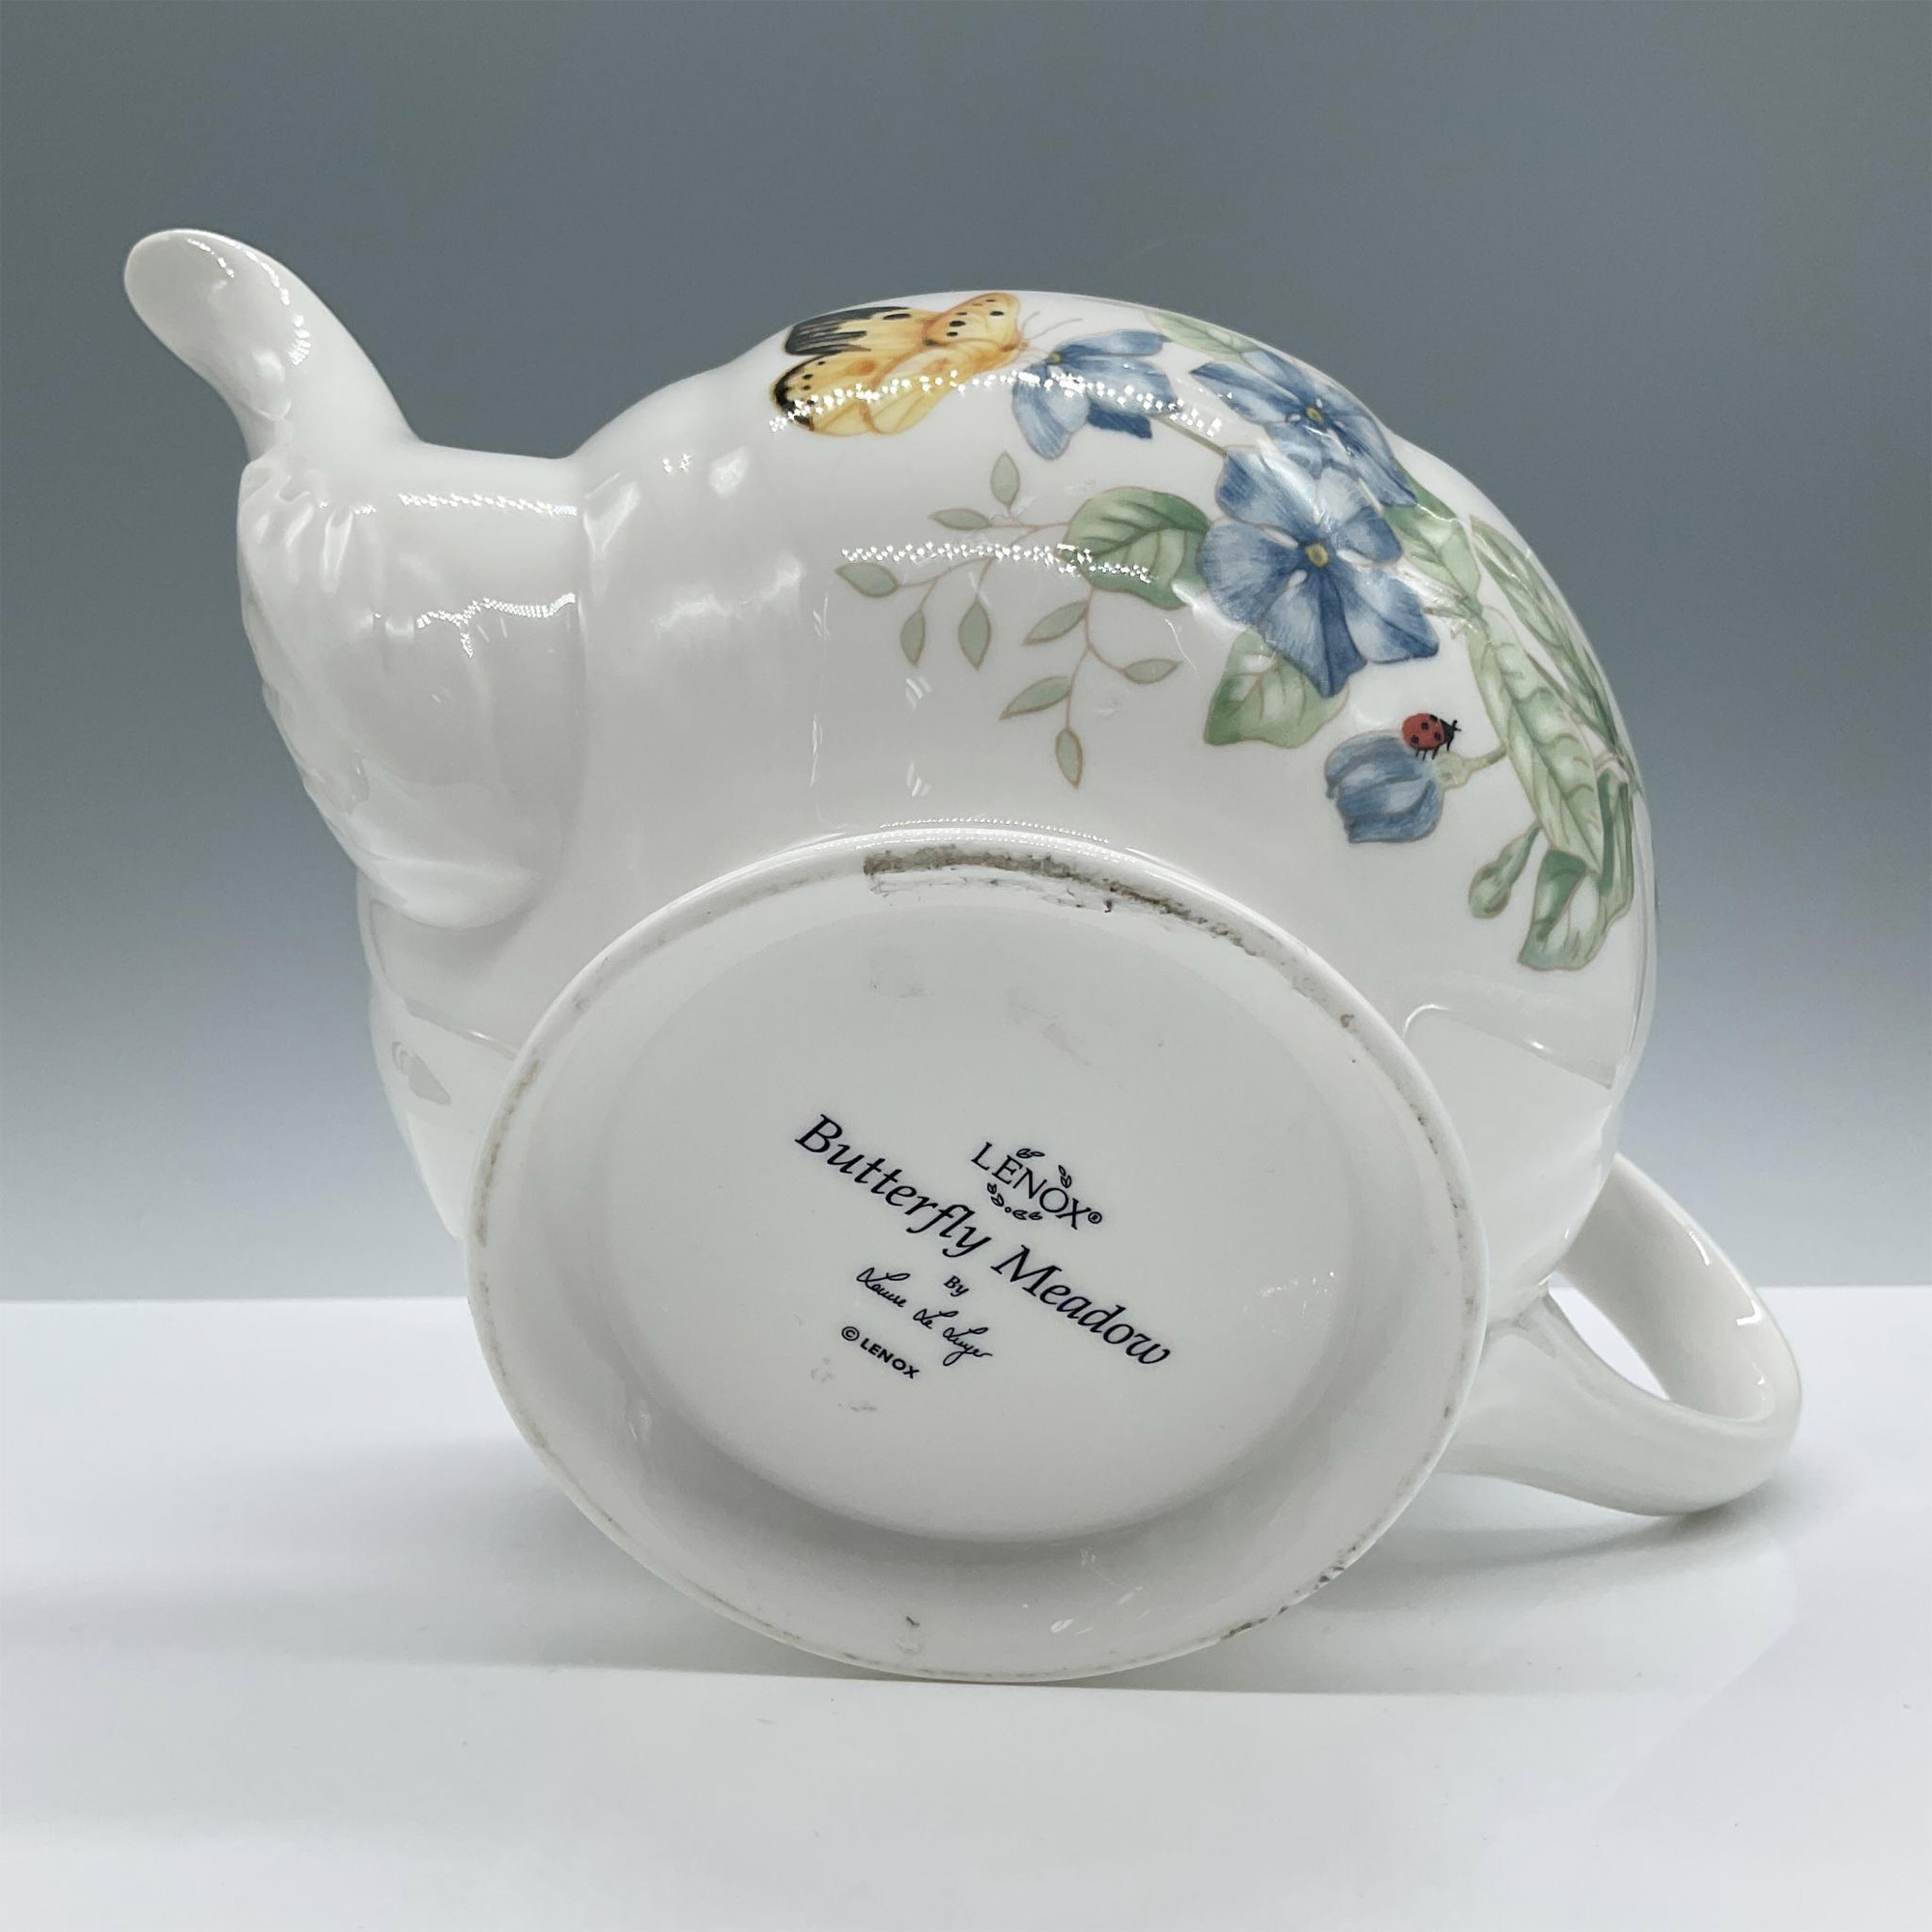 Lenox Porcelain Lidded Tea Pot, Butterfly Meadow Collection - Image 4 of 4